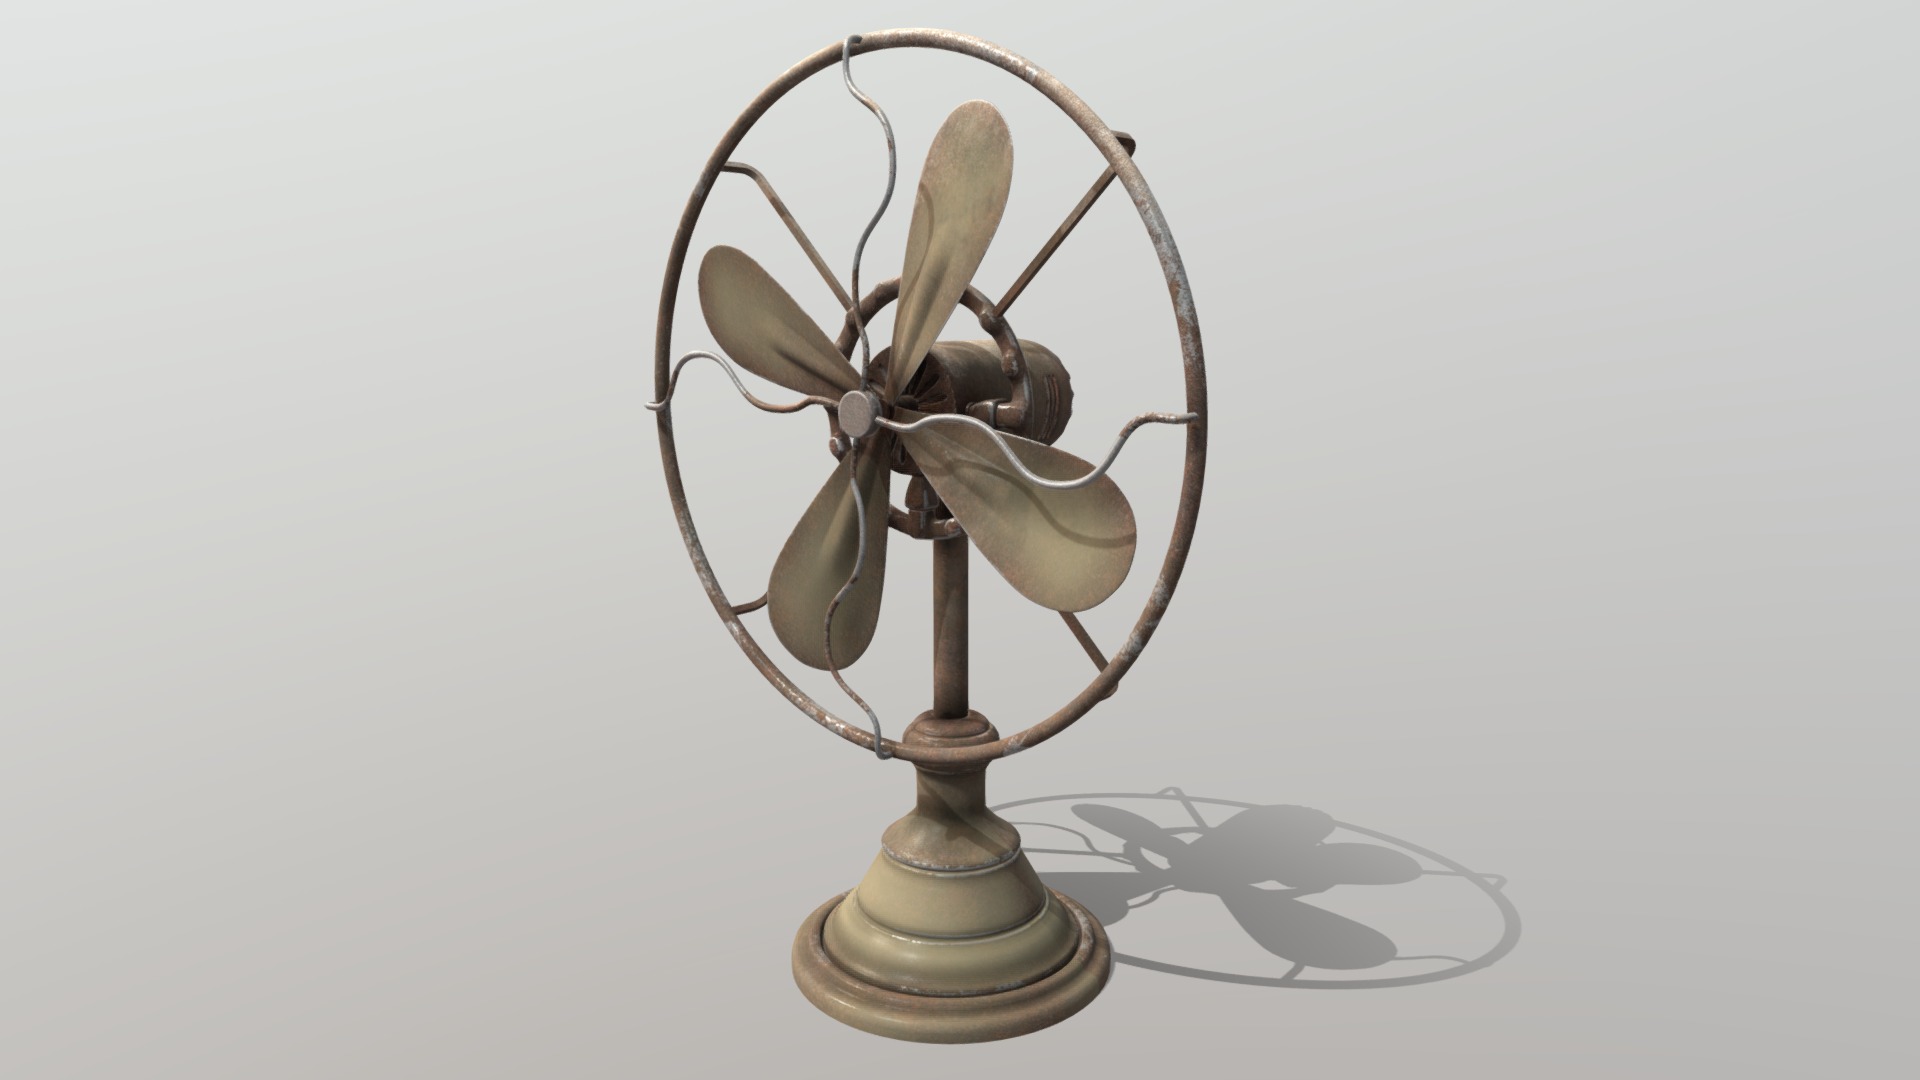 3D model Ventilator Retro - This is a 3D model of the Ventilator Retro. The 3D model is about a brass trophy with a golden handle.